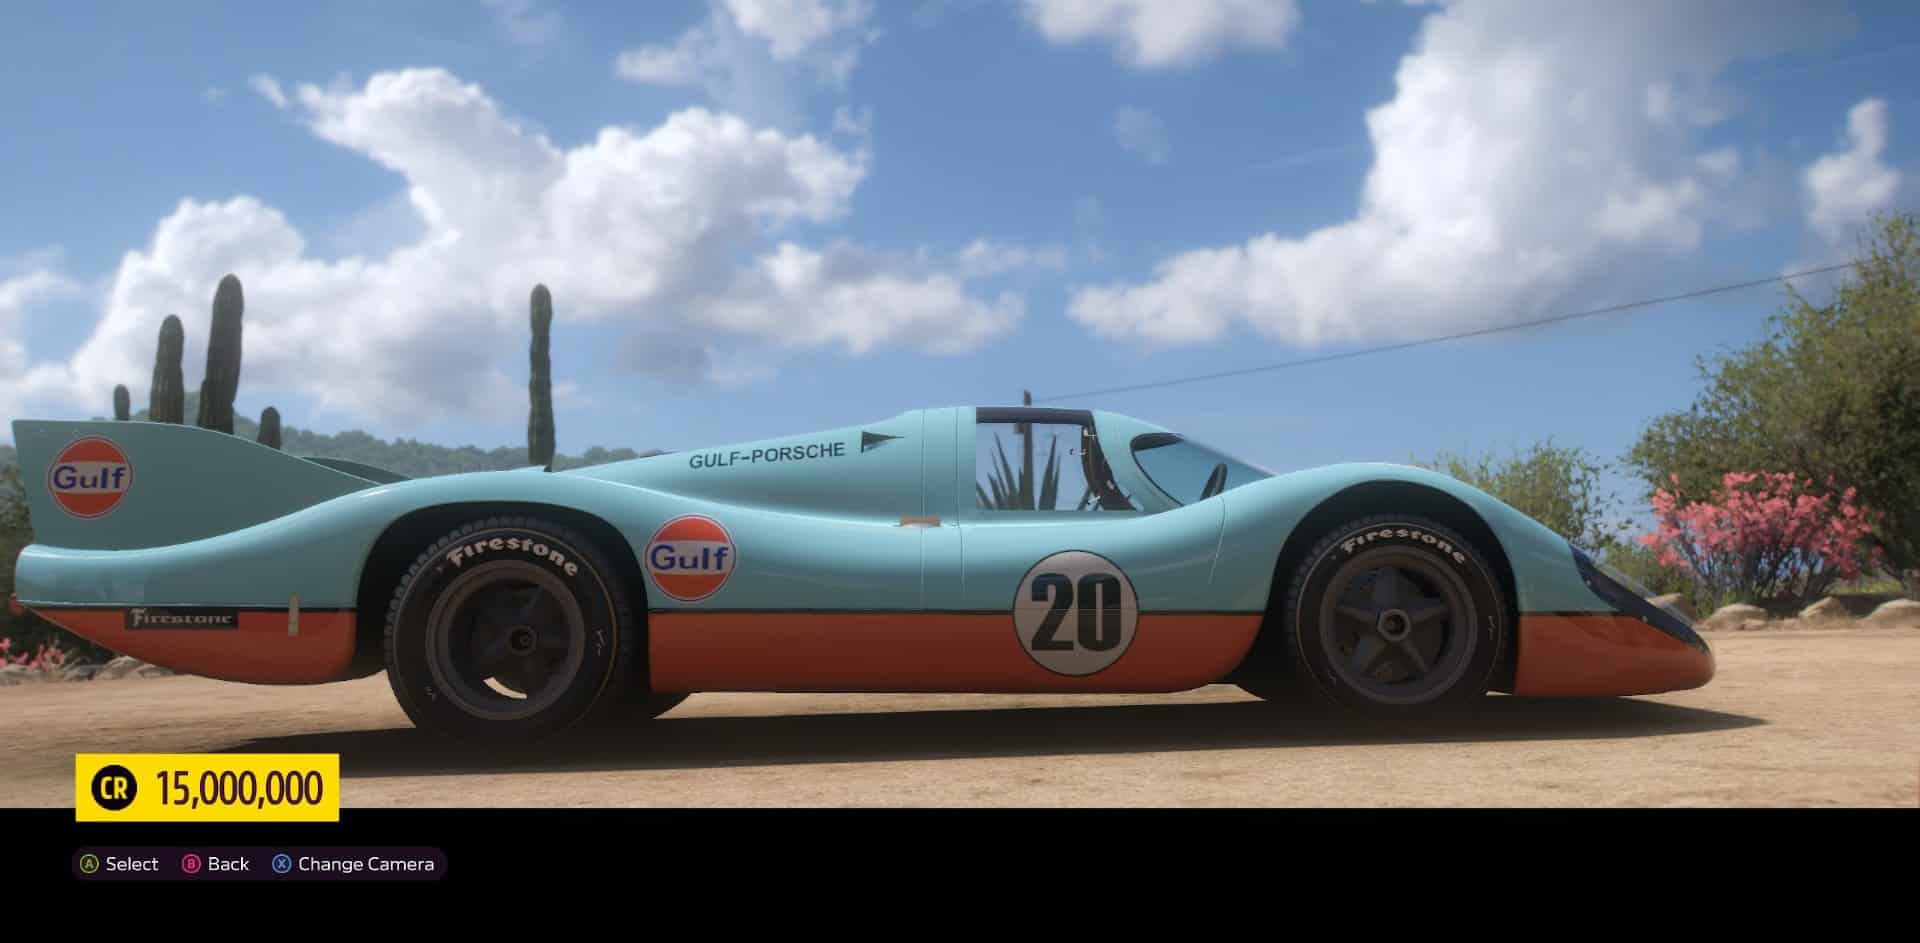 Porsche 917 LH, one of the best rally cars, under the open skies of Forza Horizon 5